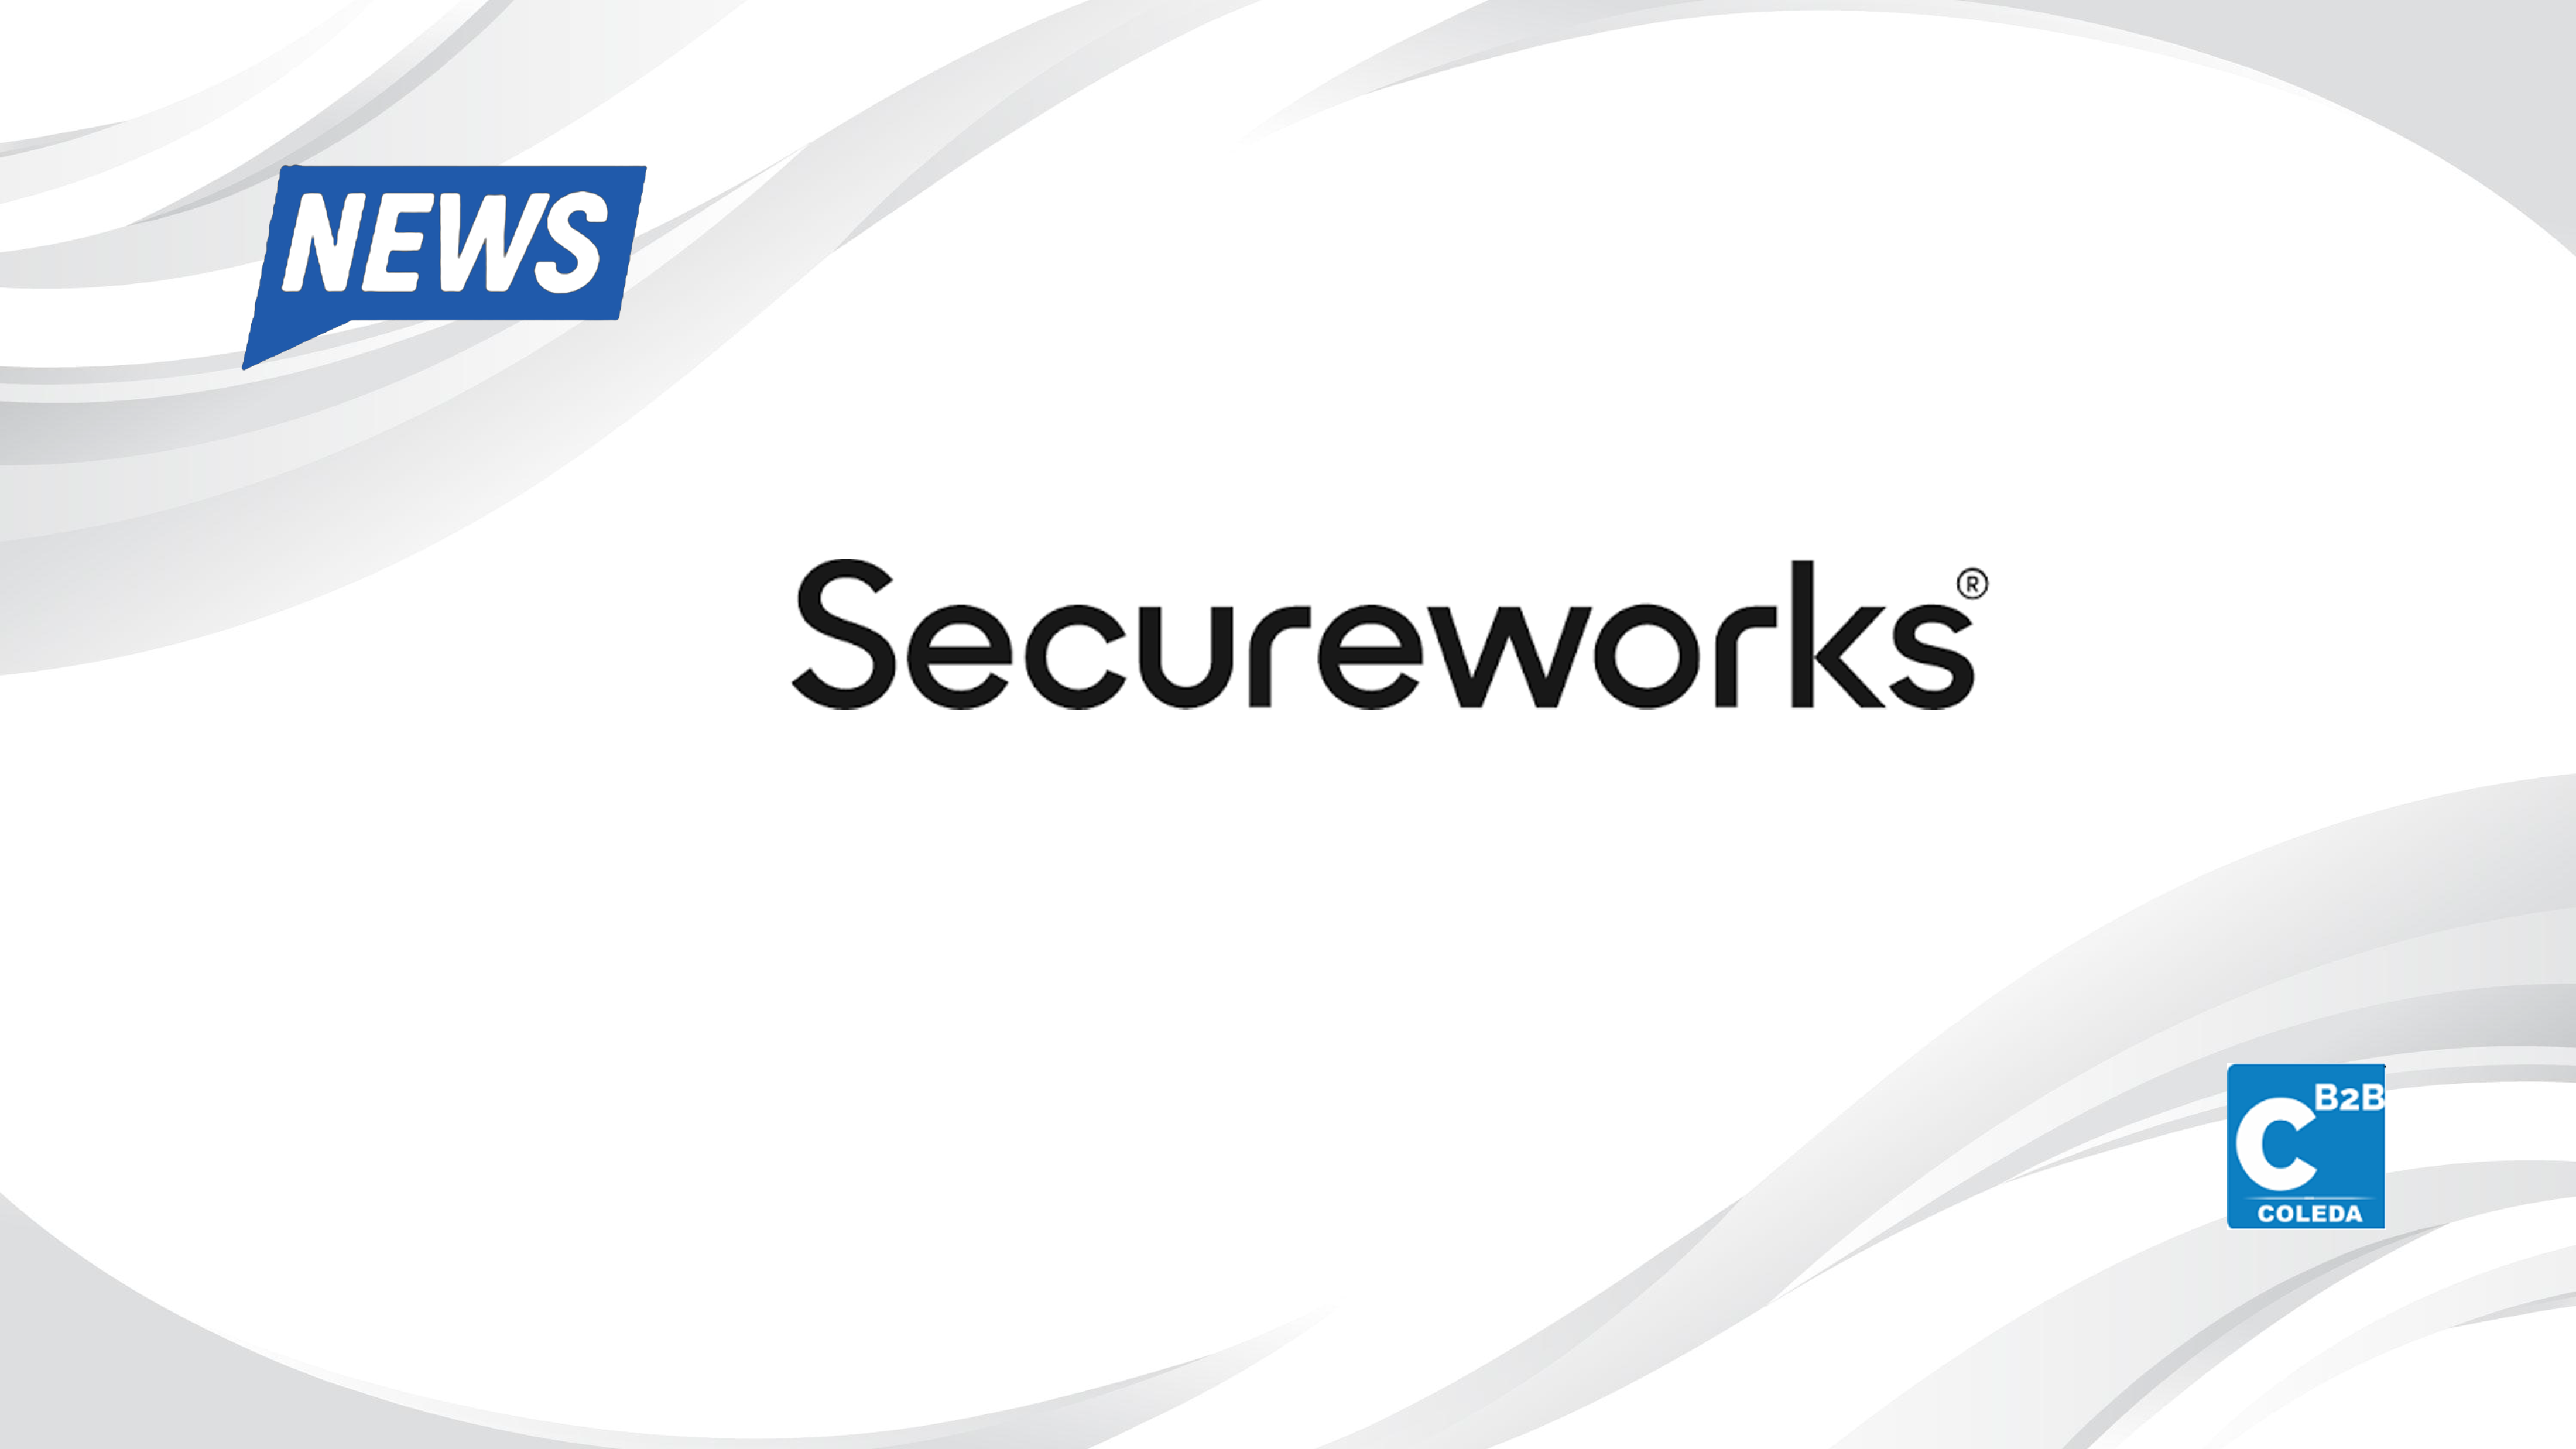 Secureworks appoints Michael Aiello as the new Chief Technology Officer